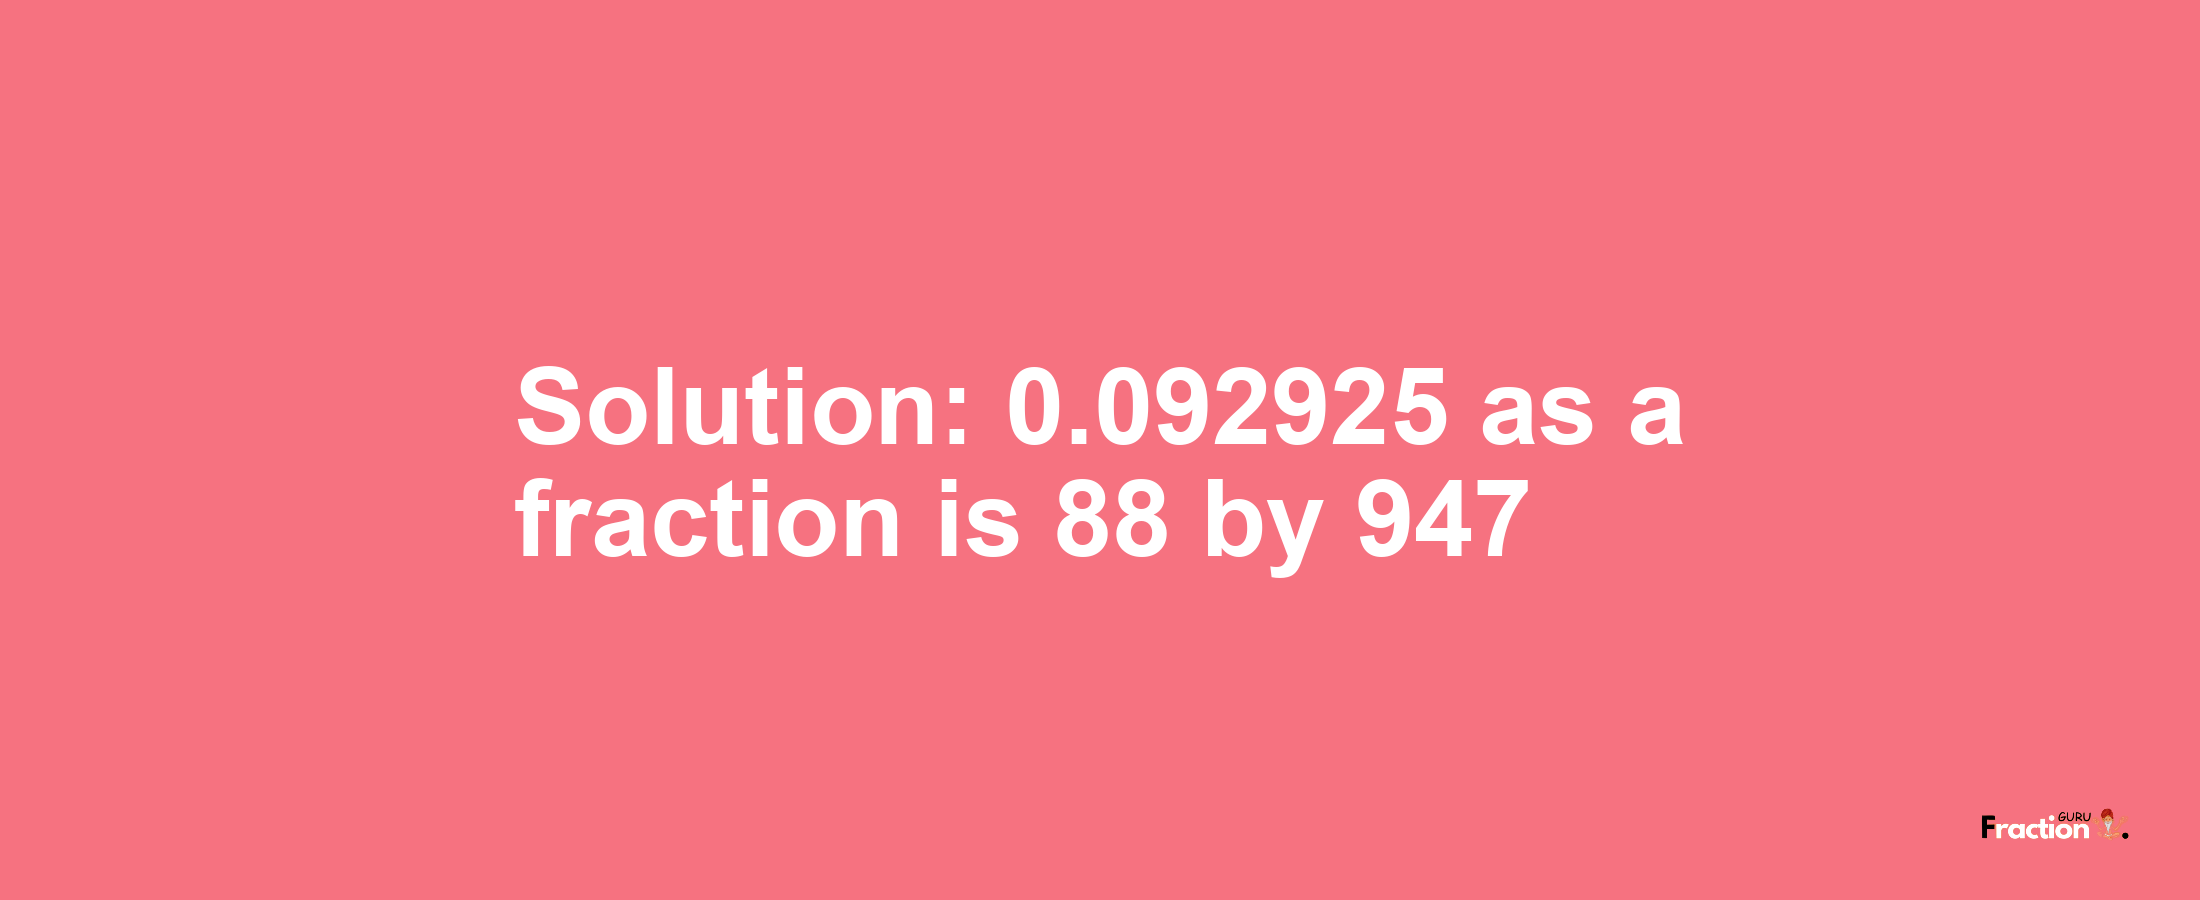 Solution:0.092925 as a fraction is 88/947